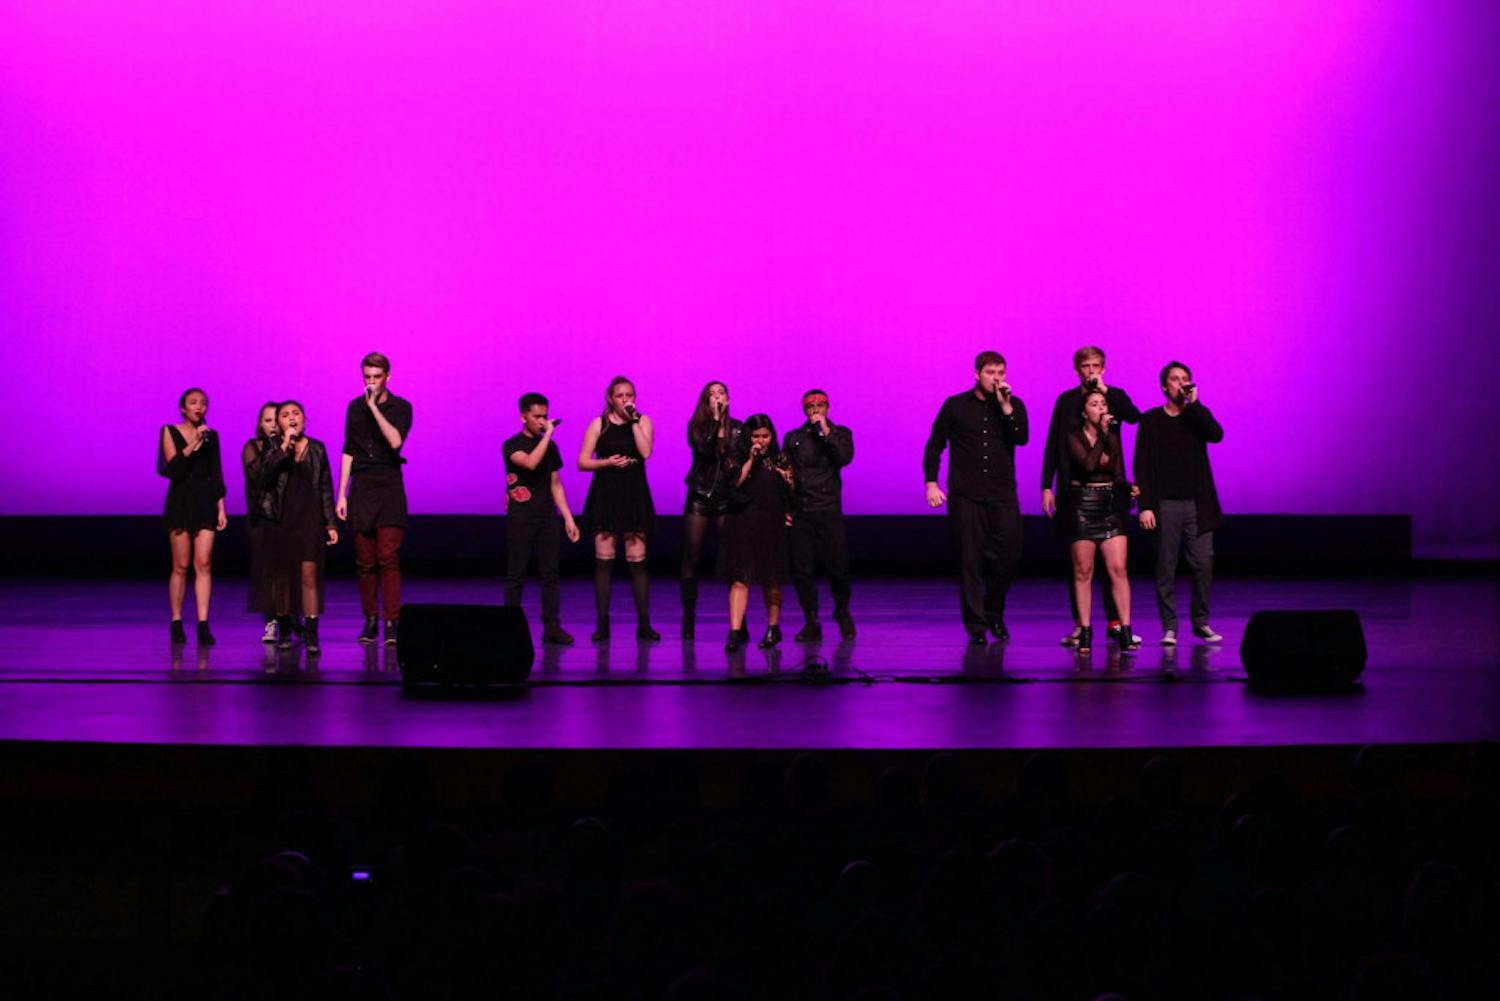 The a cappella group Tone Def performs at the International Championship of Collegiate A Cappella in 2018. The group plans to release its first recorded album in Fall 2019. Courtesy to The Alligator